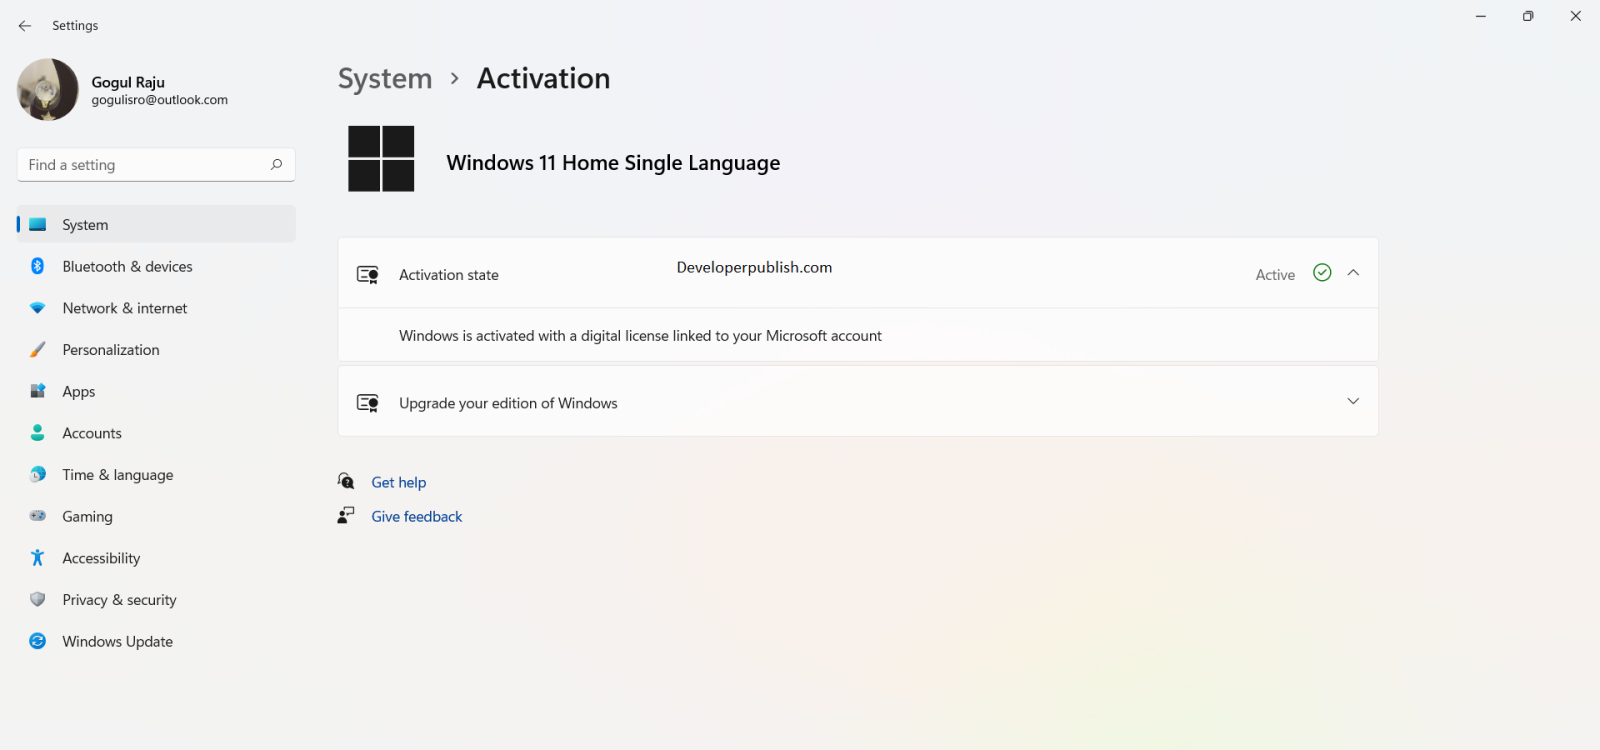 How To Check The Activation Status Of Windows 11 8260